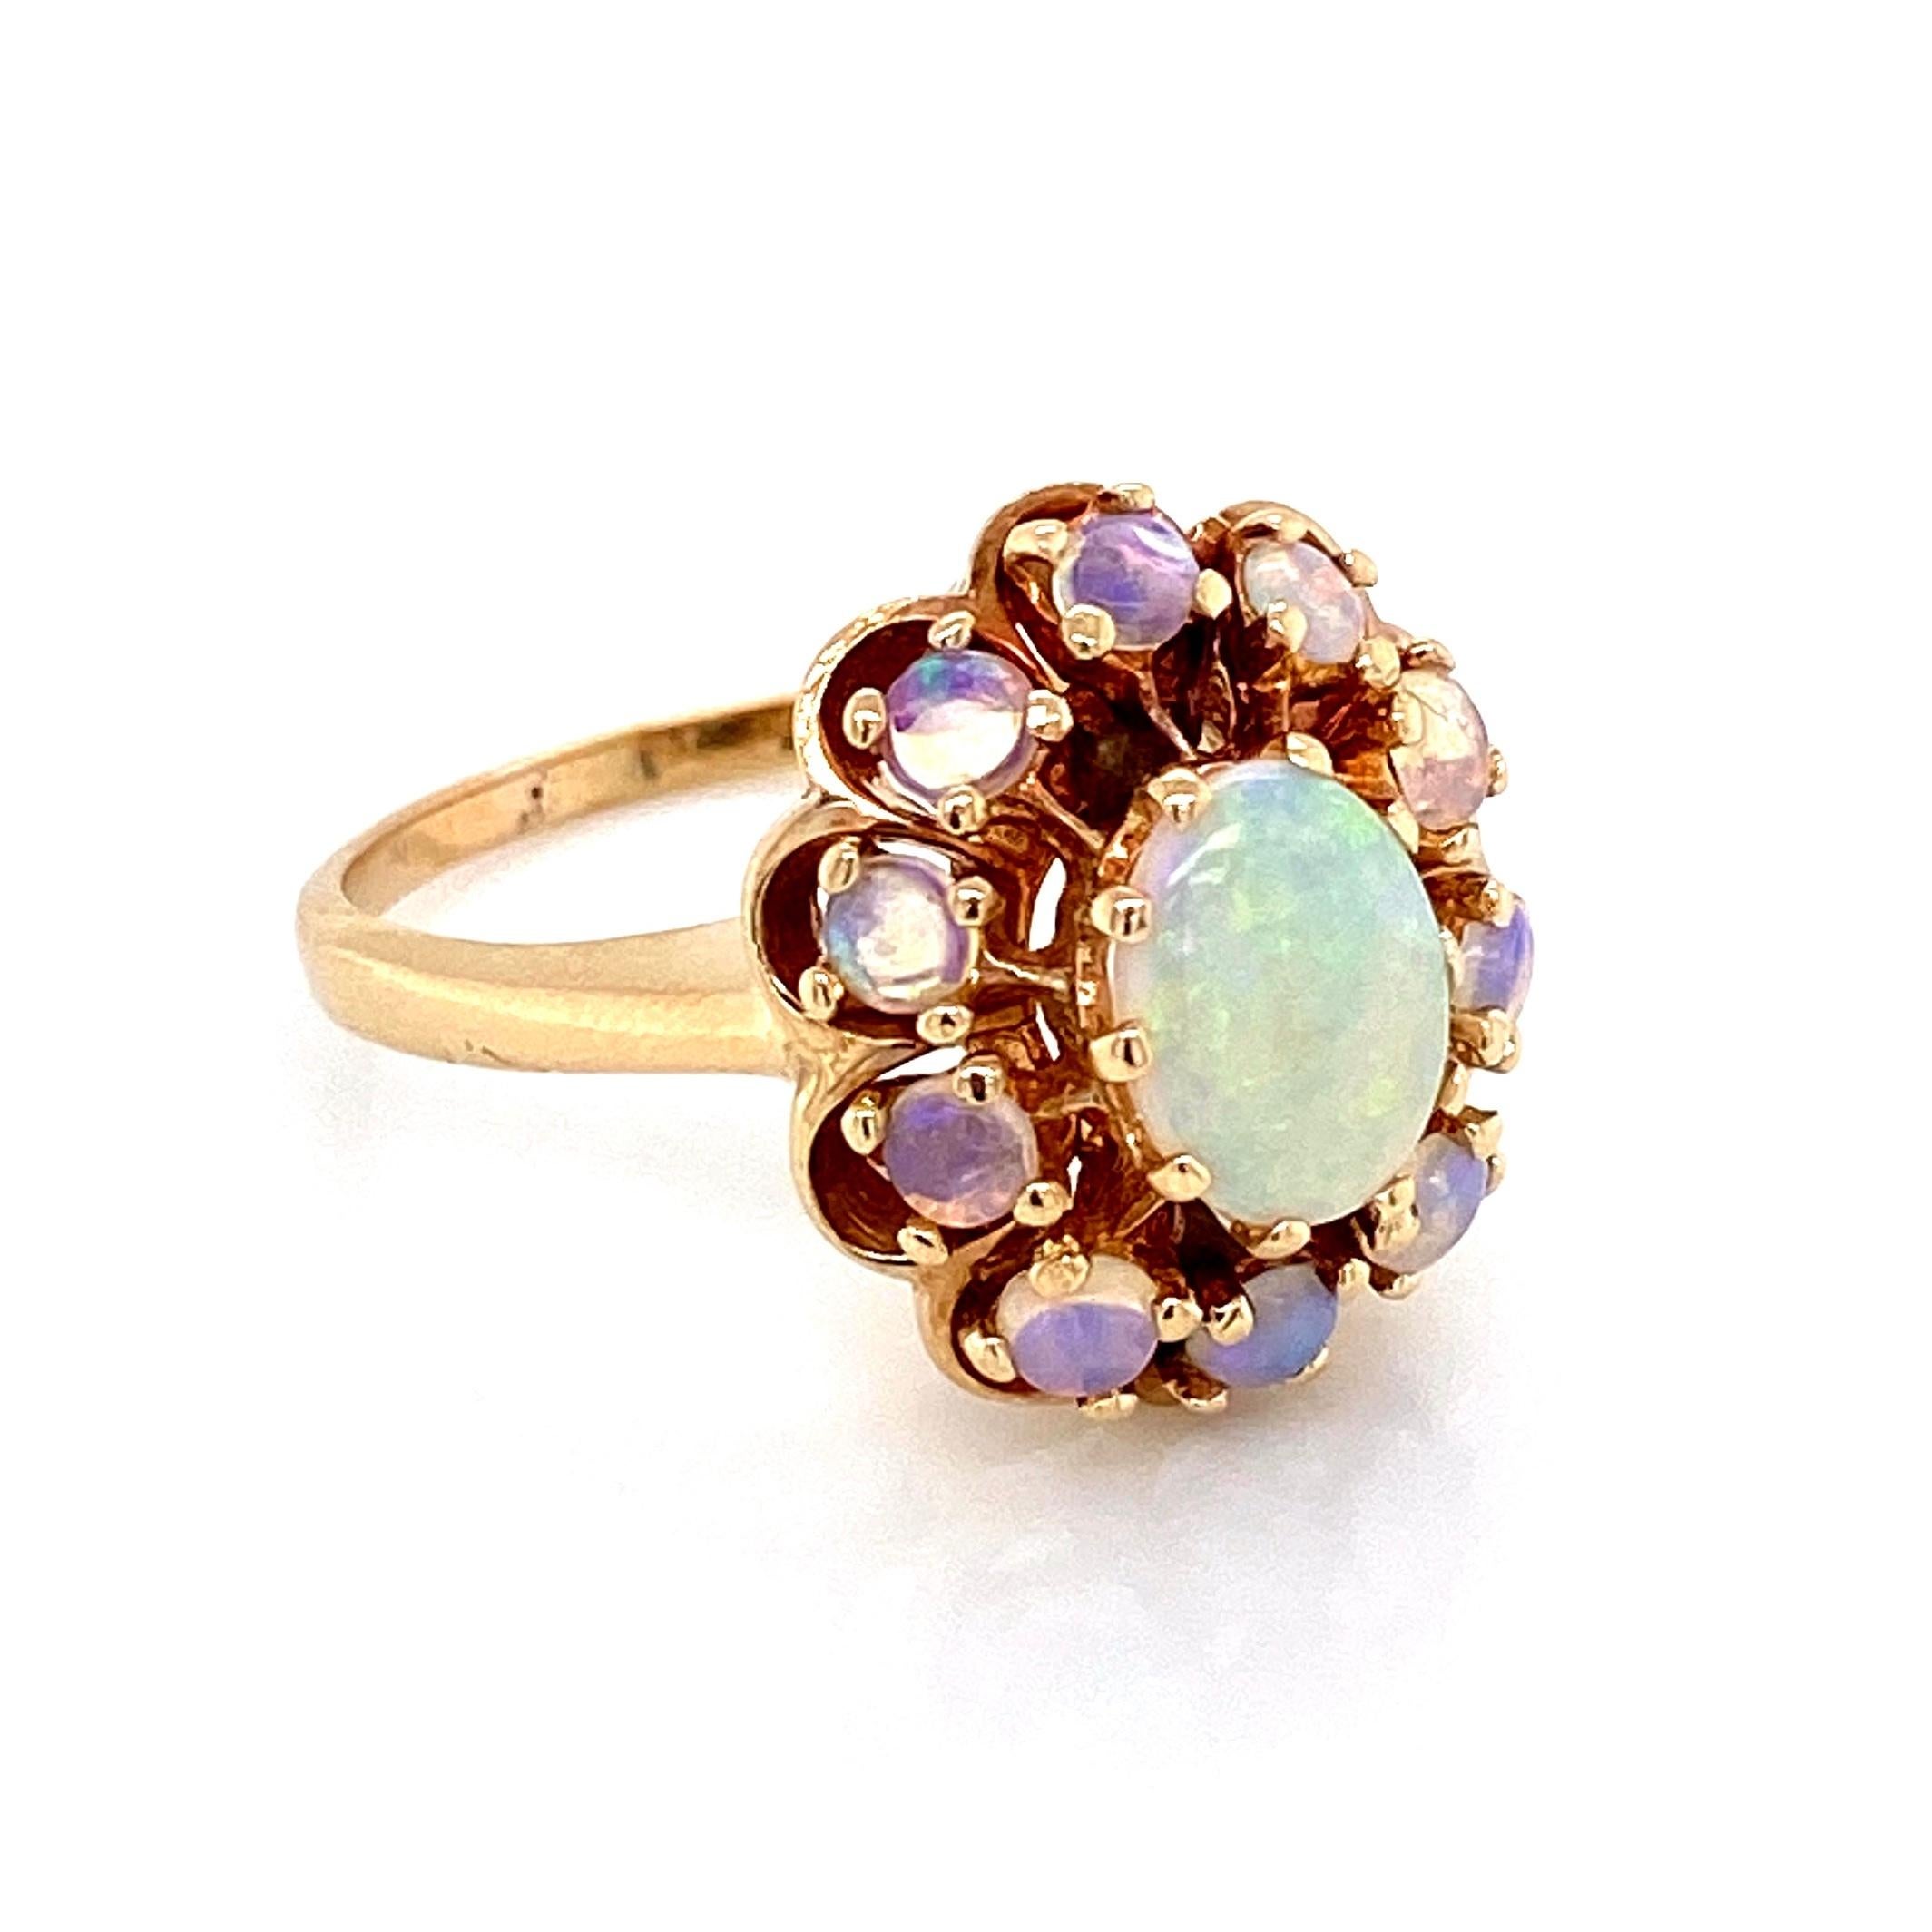 Simply Beautiful Victorian Style White Opal Gold Cocktail Cluster Ring, center securely set with a Fine White Opal Gemstone of oval form and surrounded by 10 round Opal gemstones. 1.5 total Carat weight. Hand crafted in 14 Karat yellow Gold.